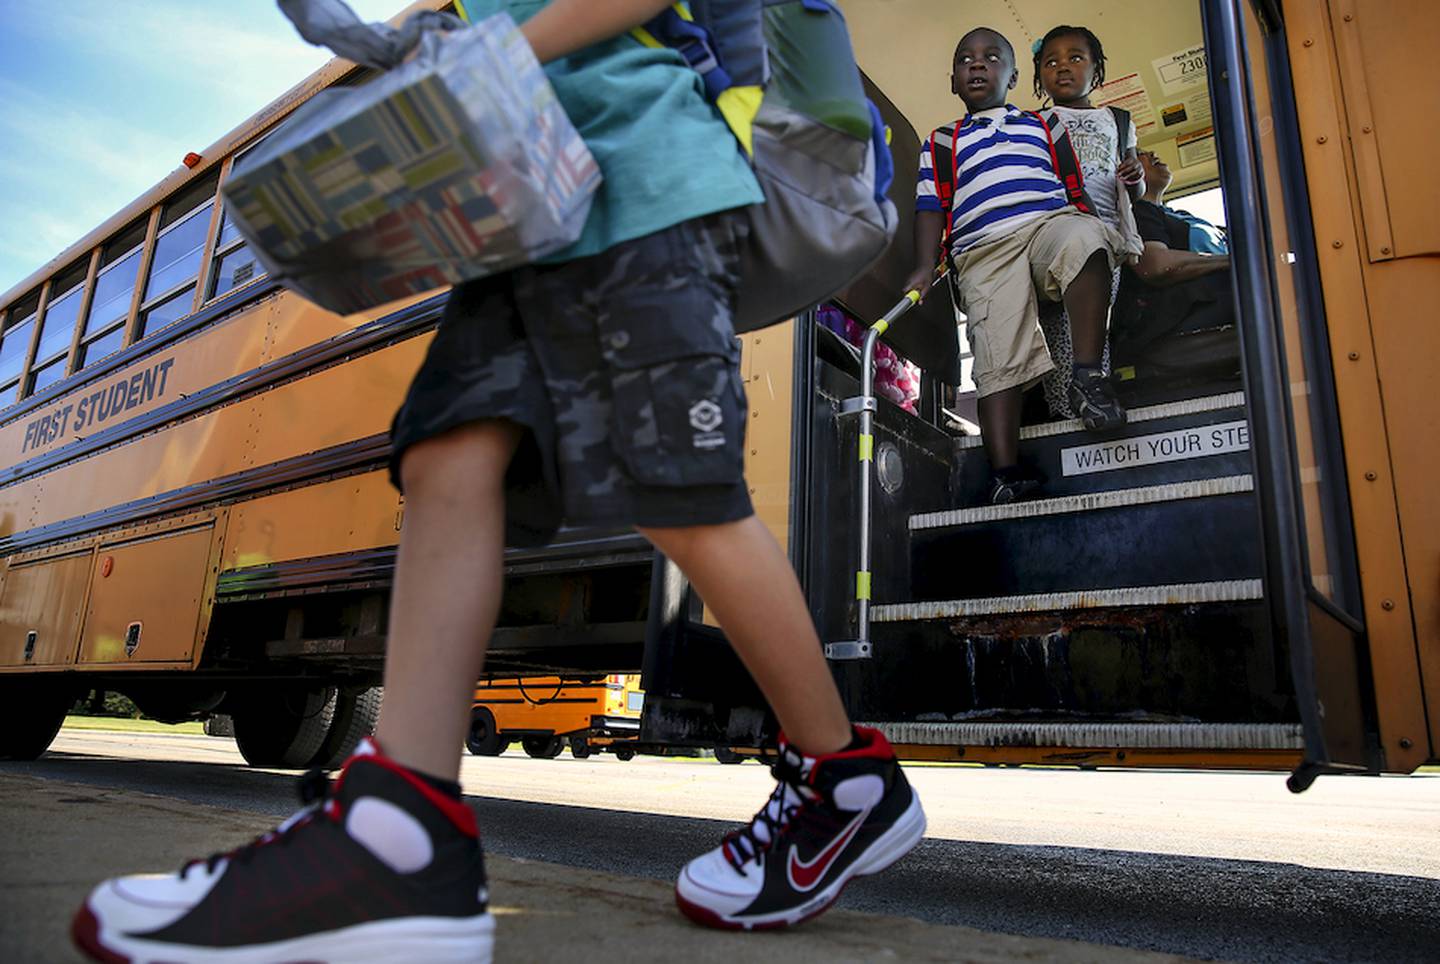 Elementary school students step off their bus Thursday, Aug. 13, before the first day of school at Creekside Elementary School in Plainfield. Nearly 600 elementary students are registered with Creekside Elementary this year. Photo by Eric Ginnard - eginnard@shawmedia.com